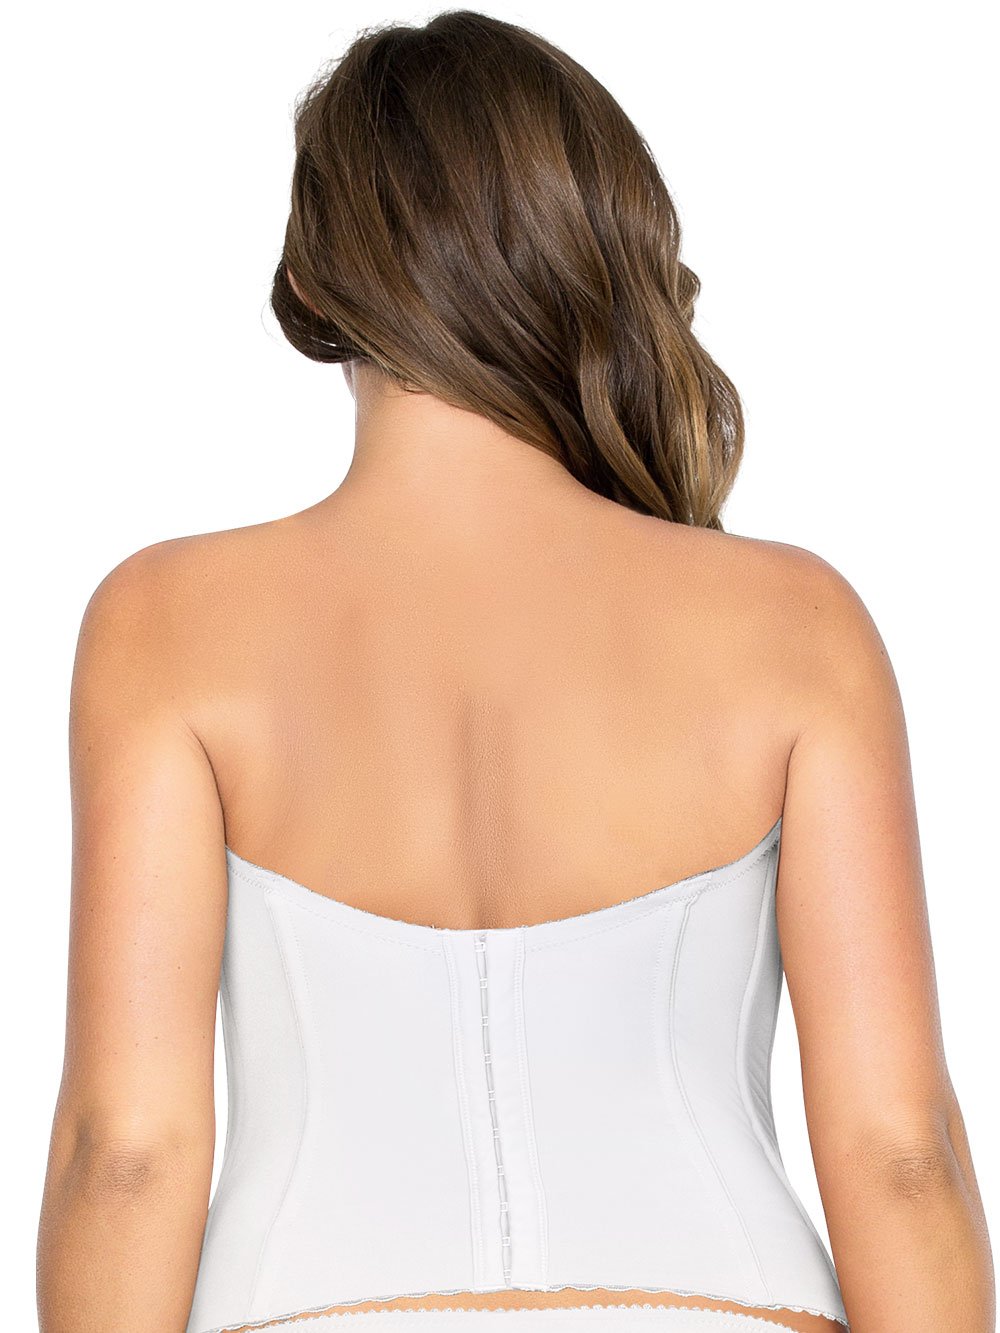 Dominique Lace Low Back Plunge Strapless Push Up Bustier Style 7759 - White  - 32B